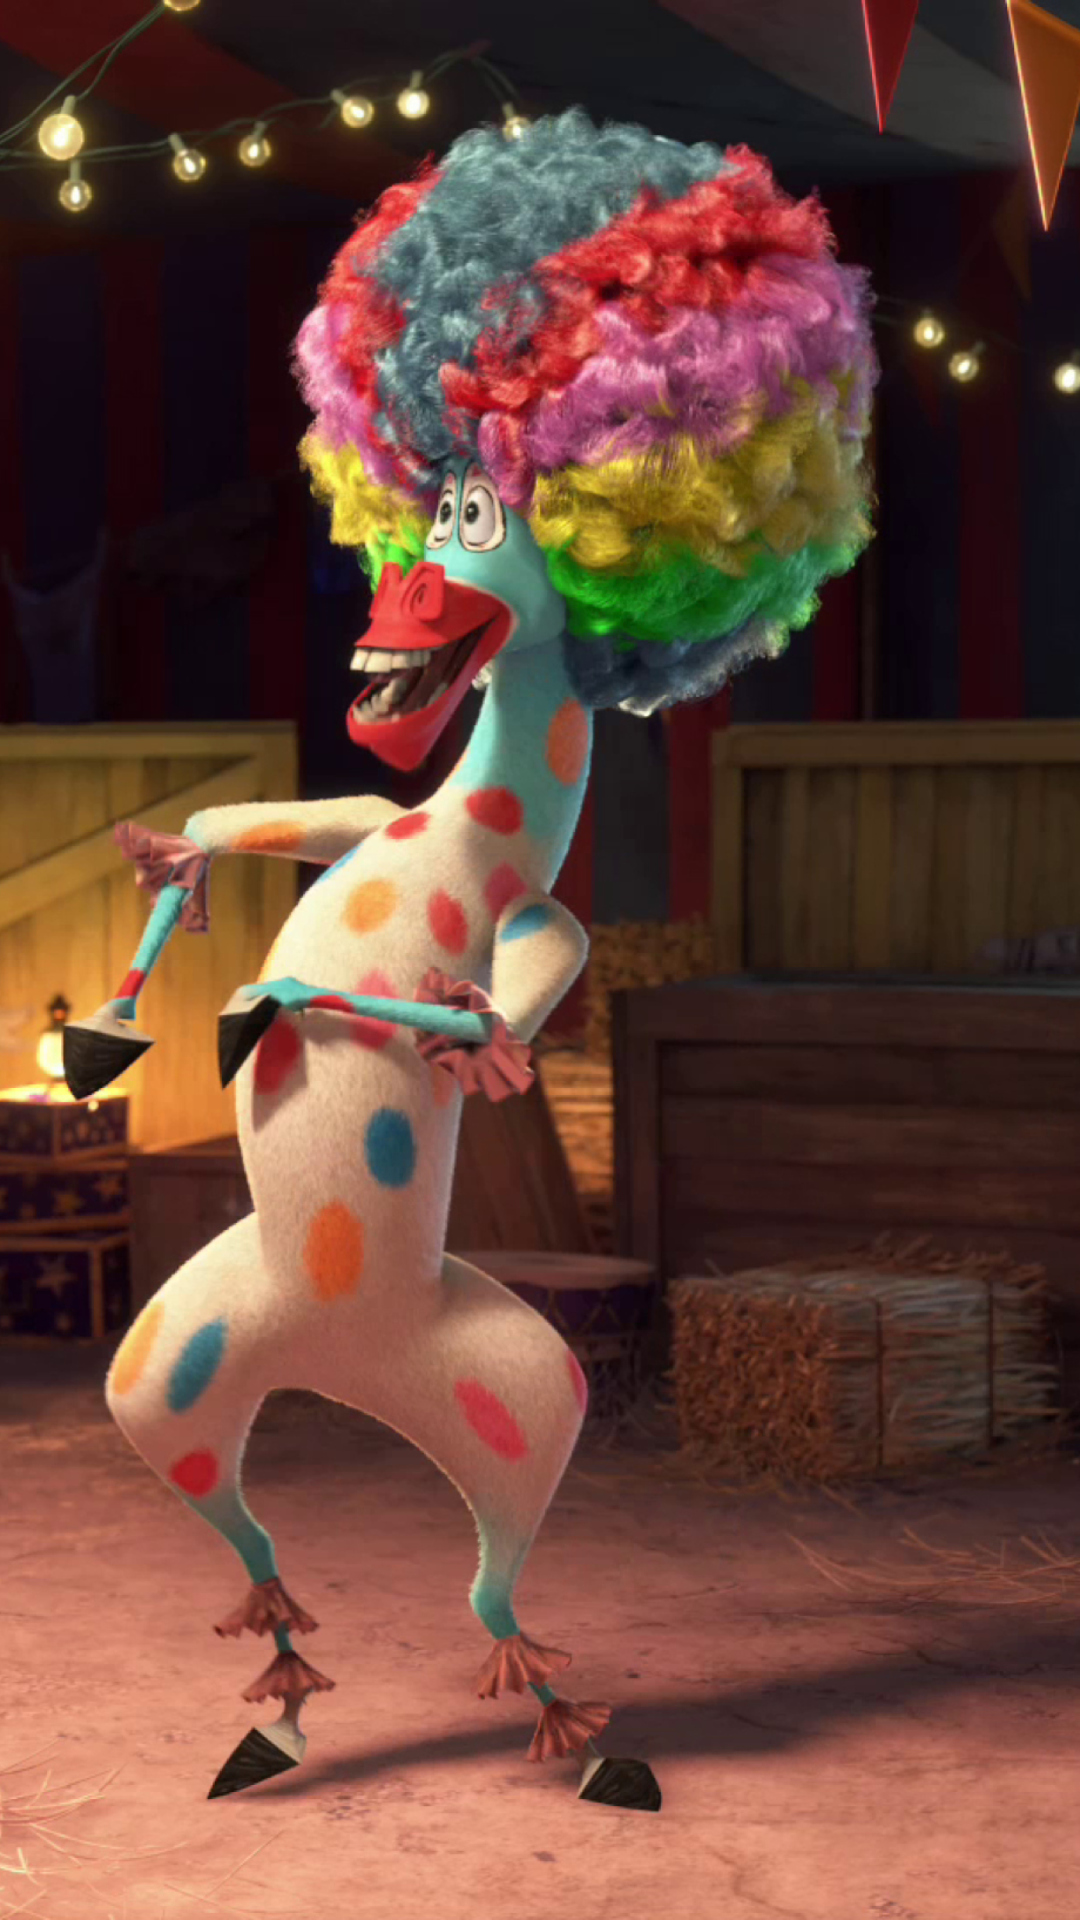 Madagascar 3 Europes Most Wanted wallpaper 1080x1920